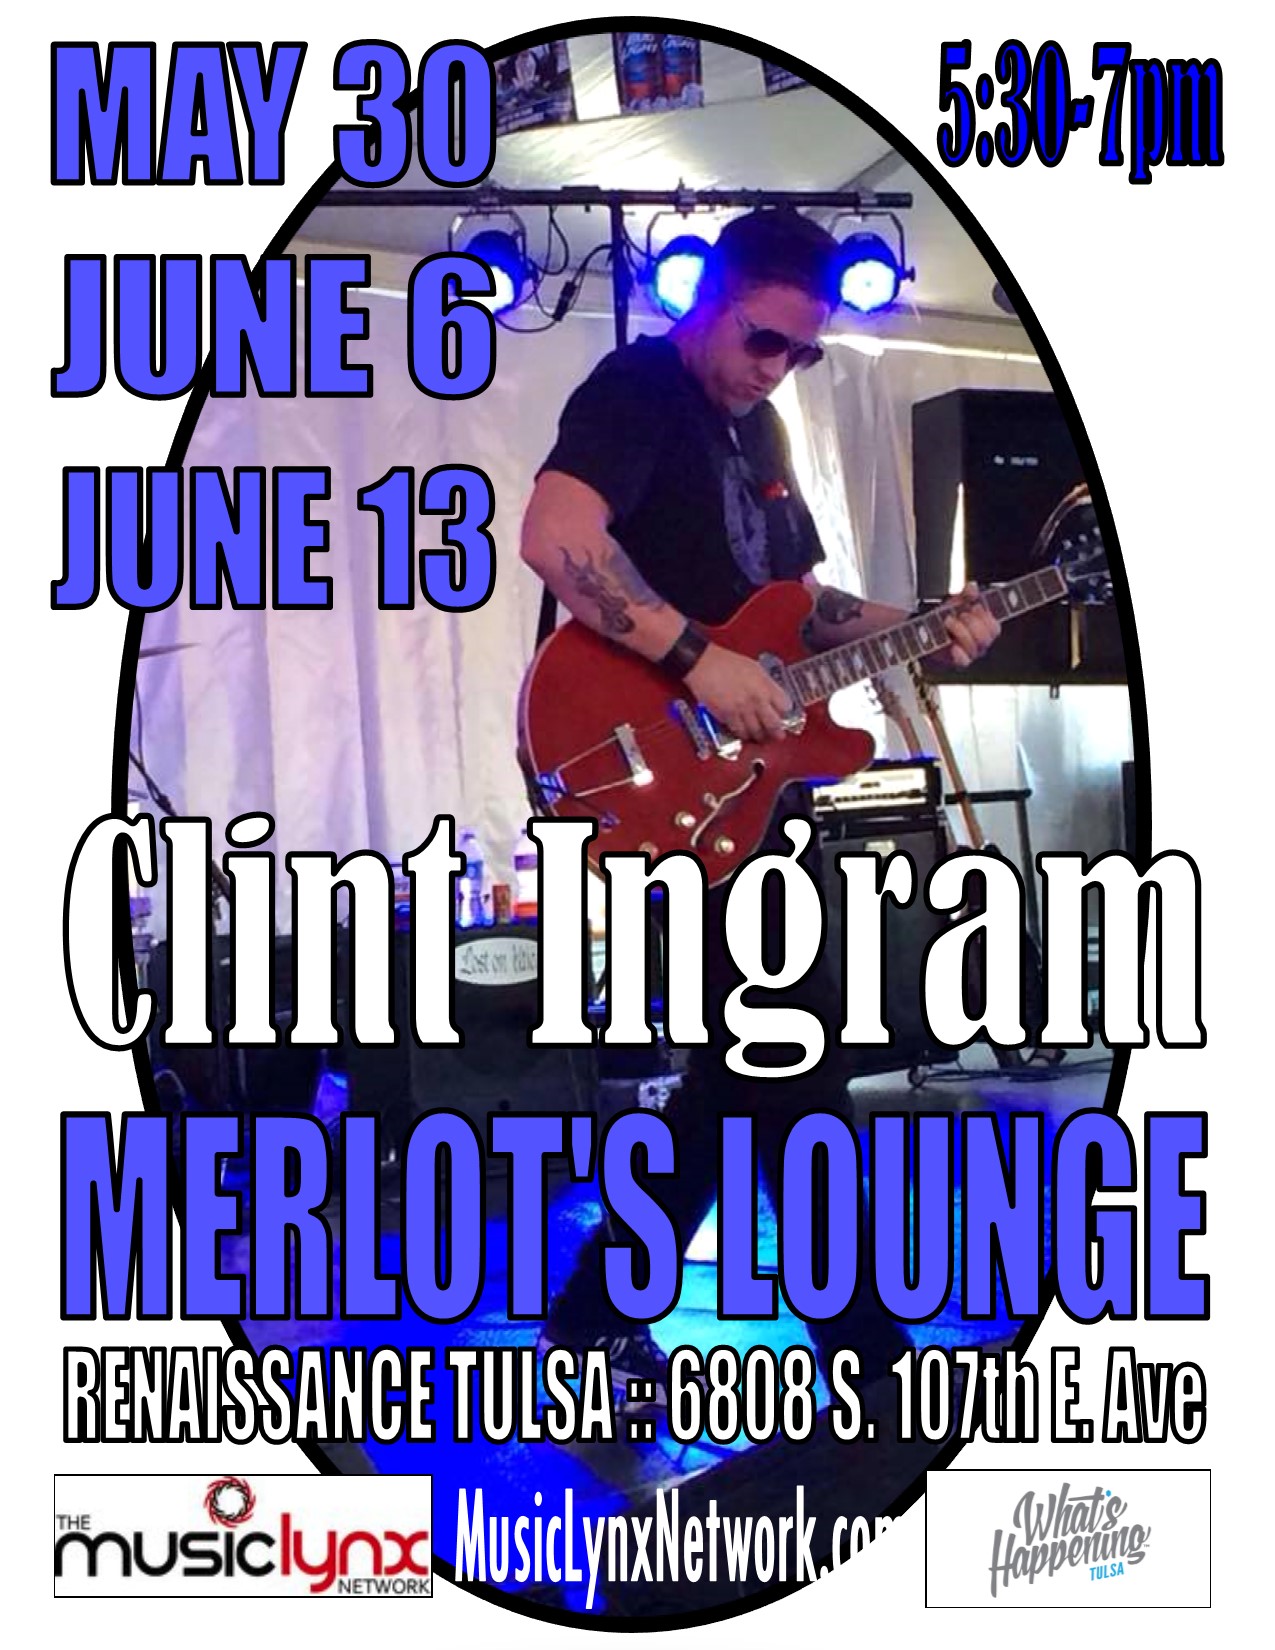 Live Music with Clint Ingram | Discover Renaissance Hotels